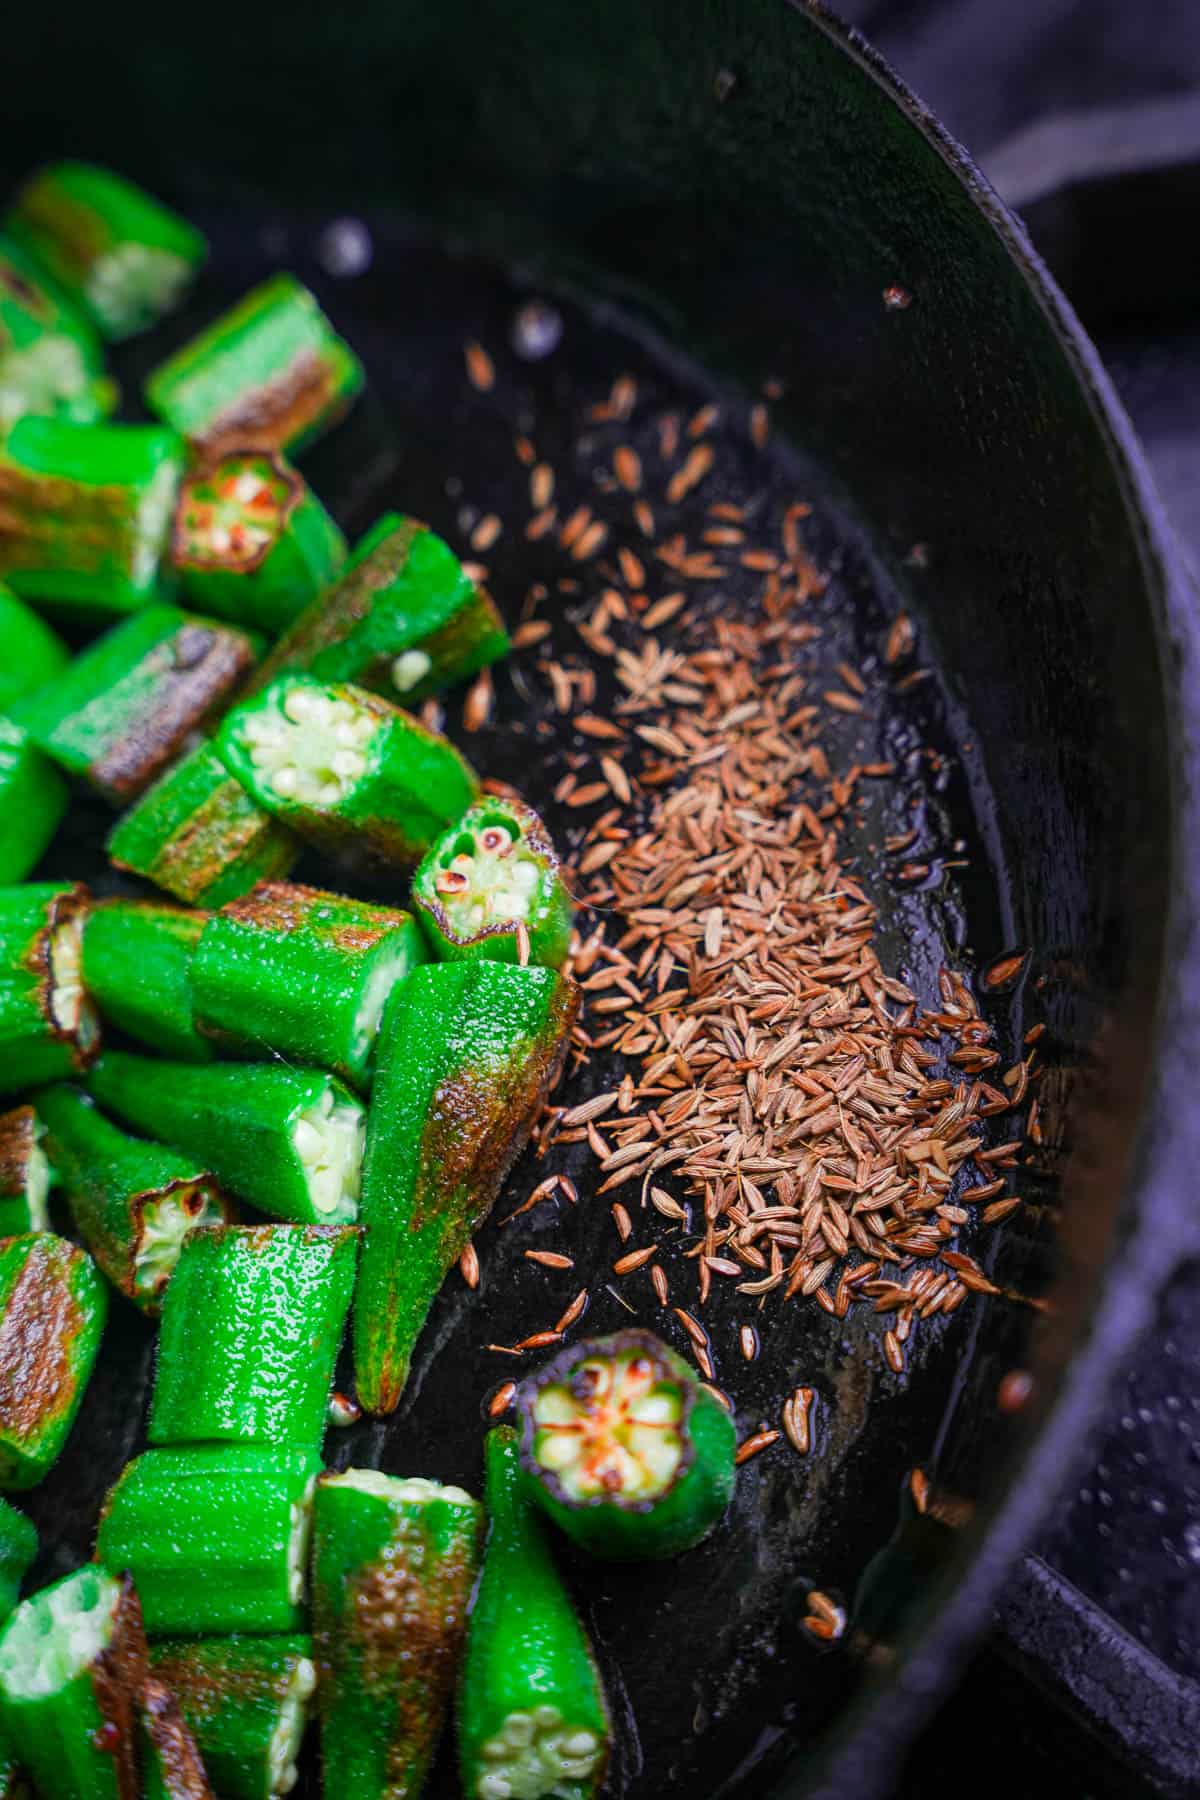 Cumin seeds are added directly to the bare metal surface of a cast iron pan next to the cooking okra.